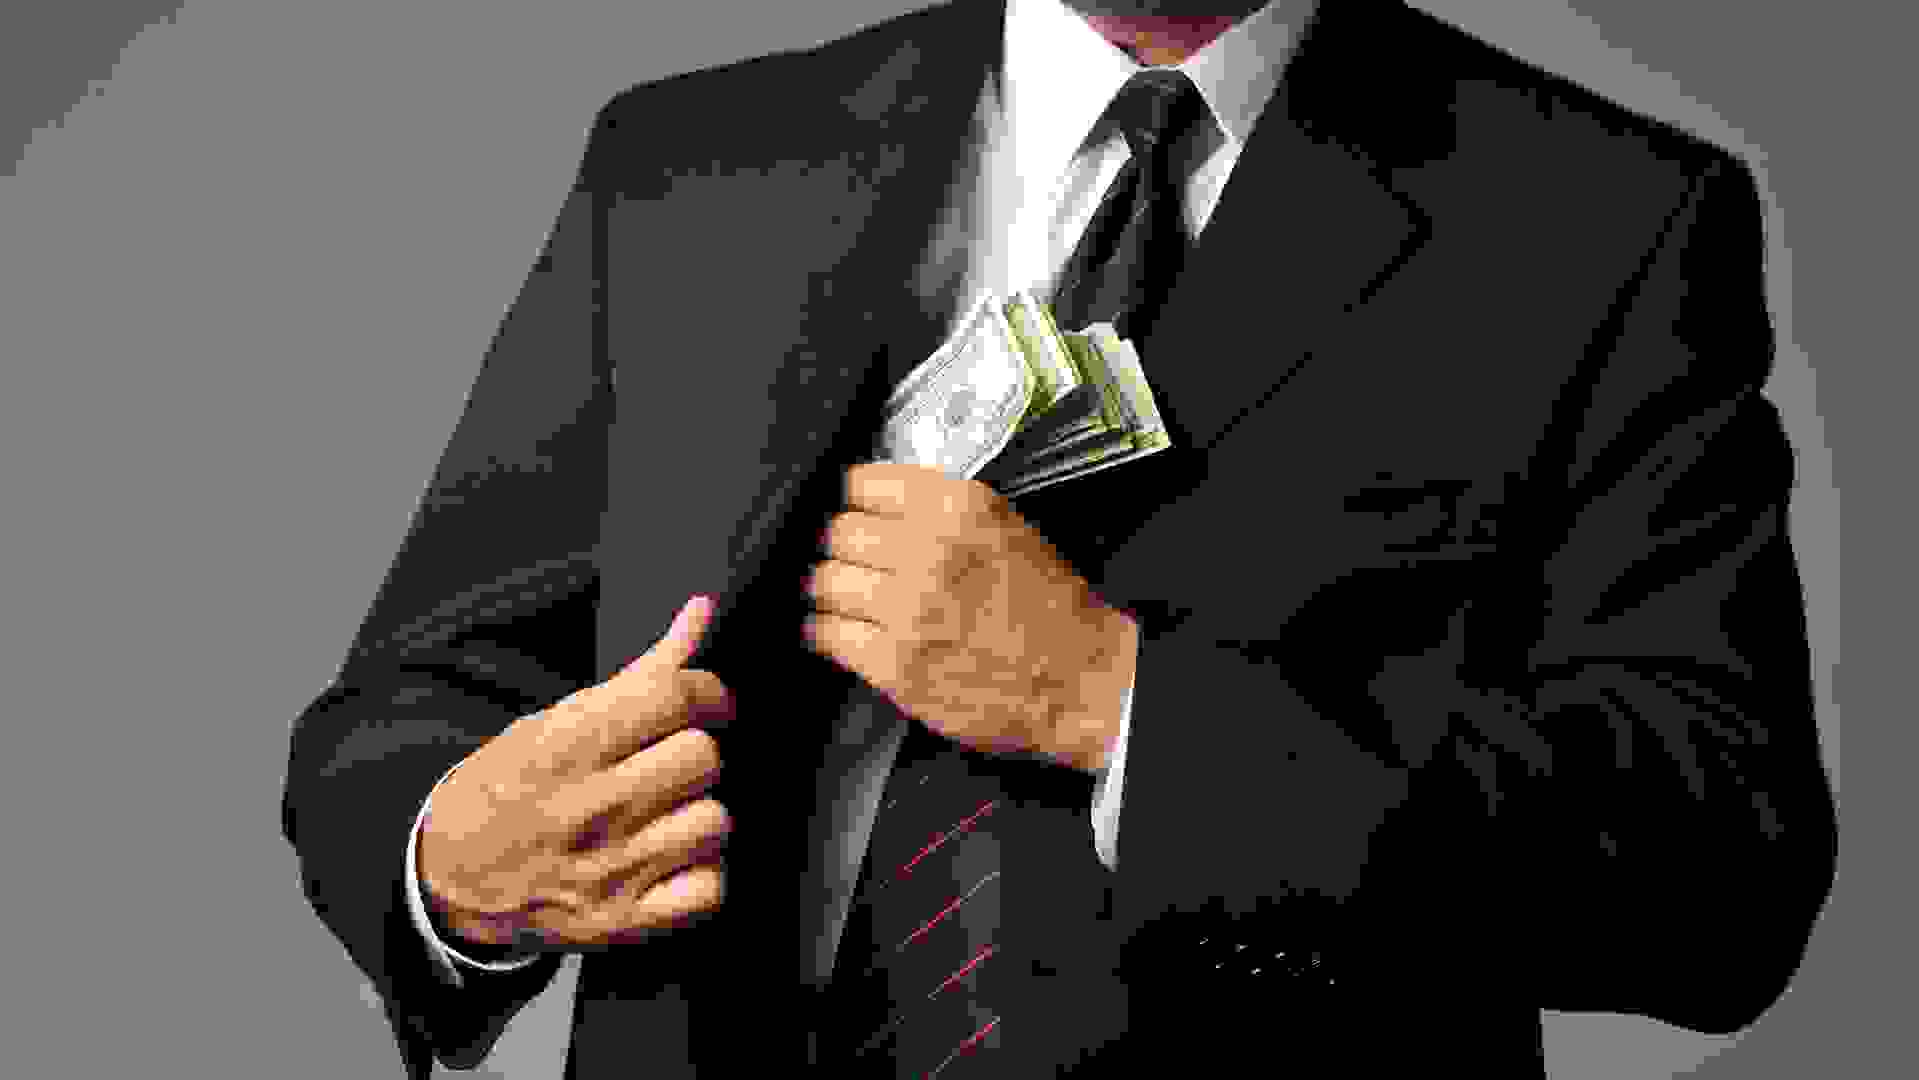 Horizontal studio image of a well dressed businessman putting a stack of $100 bills in his suit coat pocket.